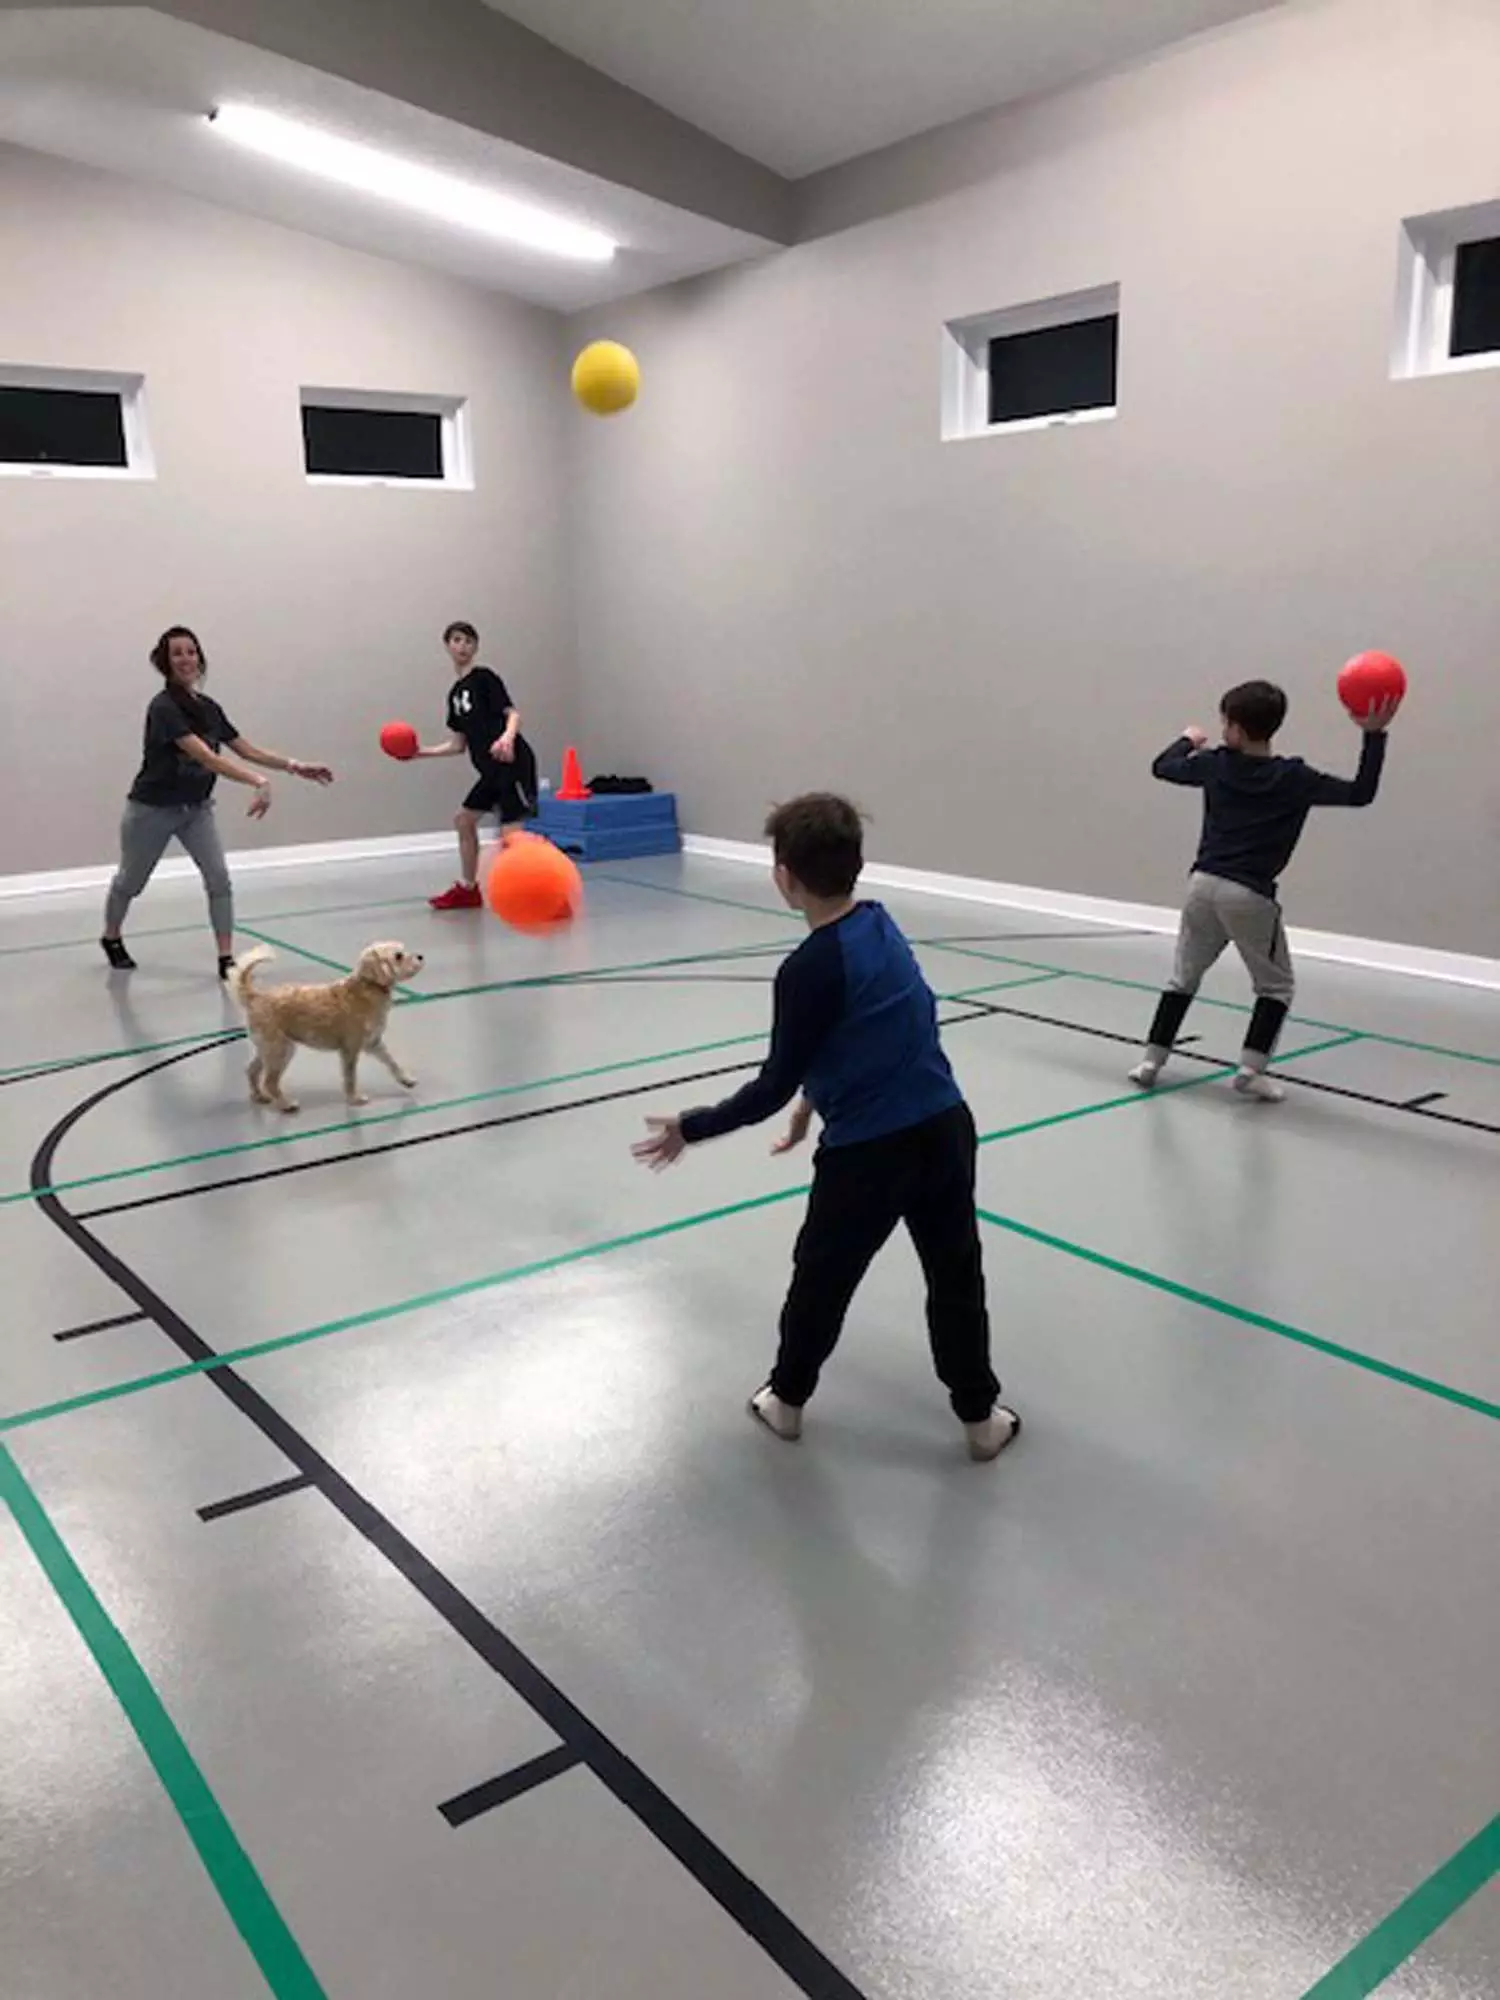 Weather? Snow? Rain? Cold? Hot? Kids can play indoors!